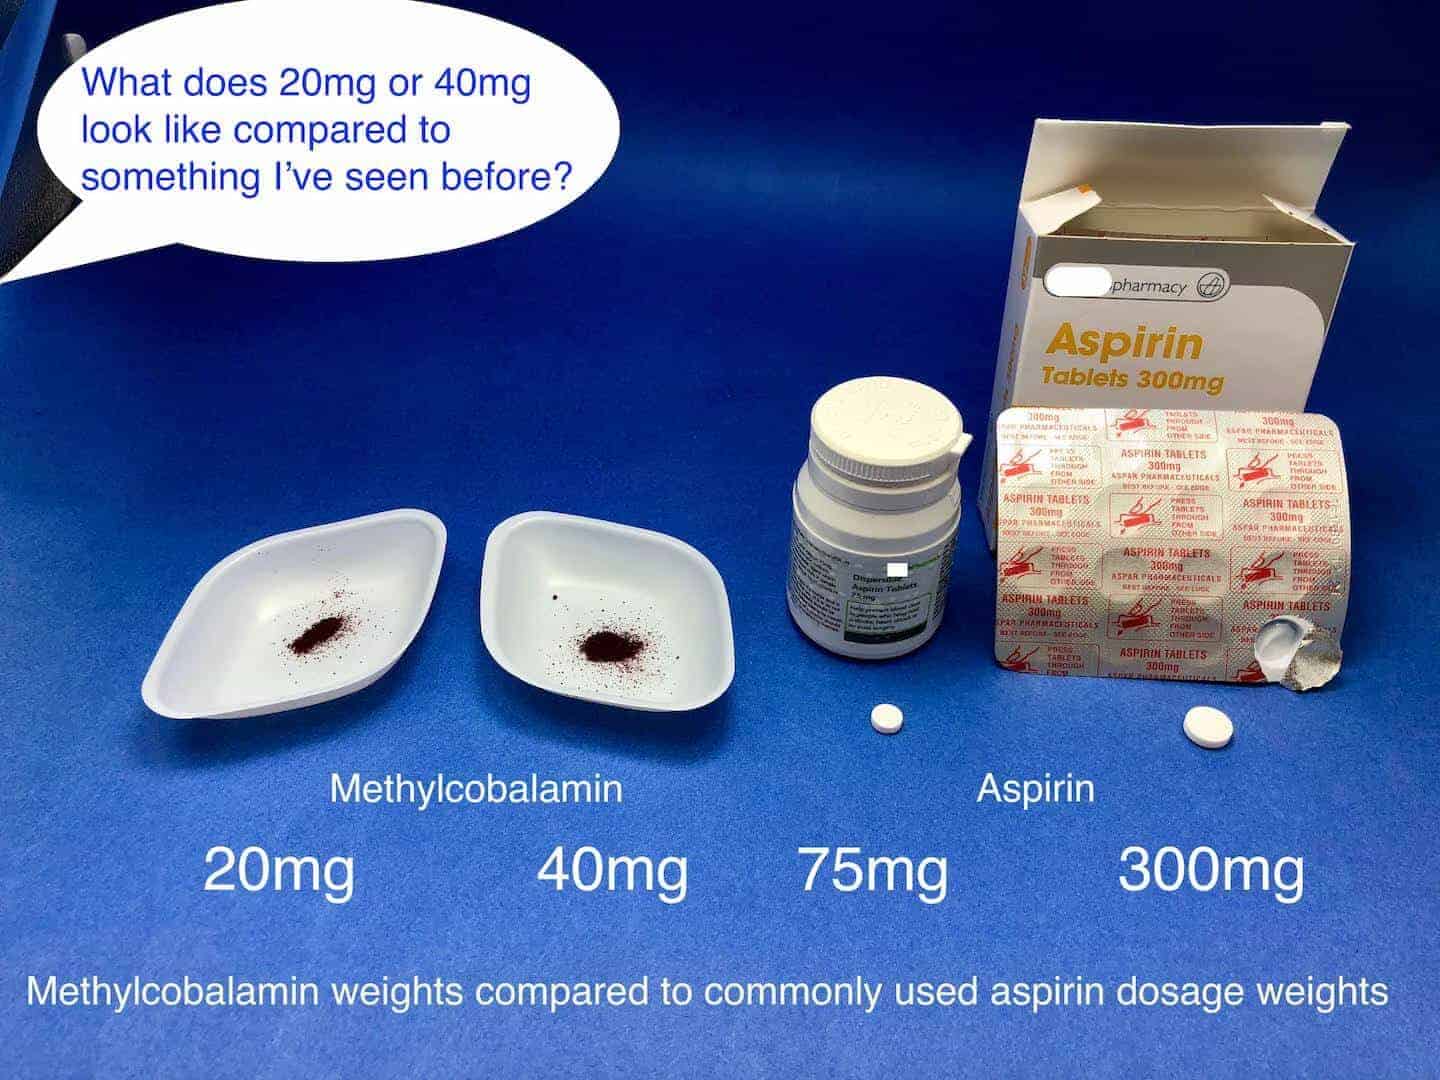 40mg of B12 is a tiny amount to the human eye. Here's what it looks like compared to aspirin tablets.